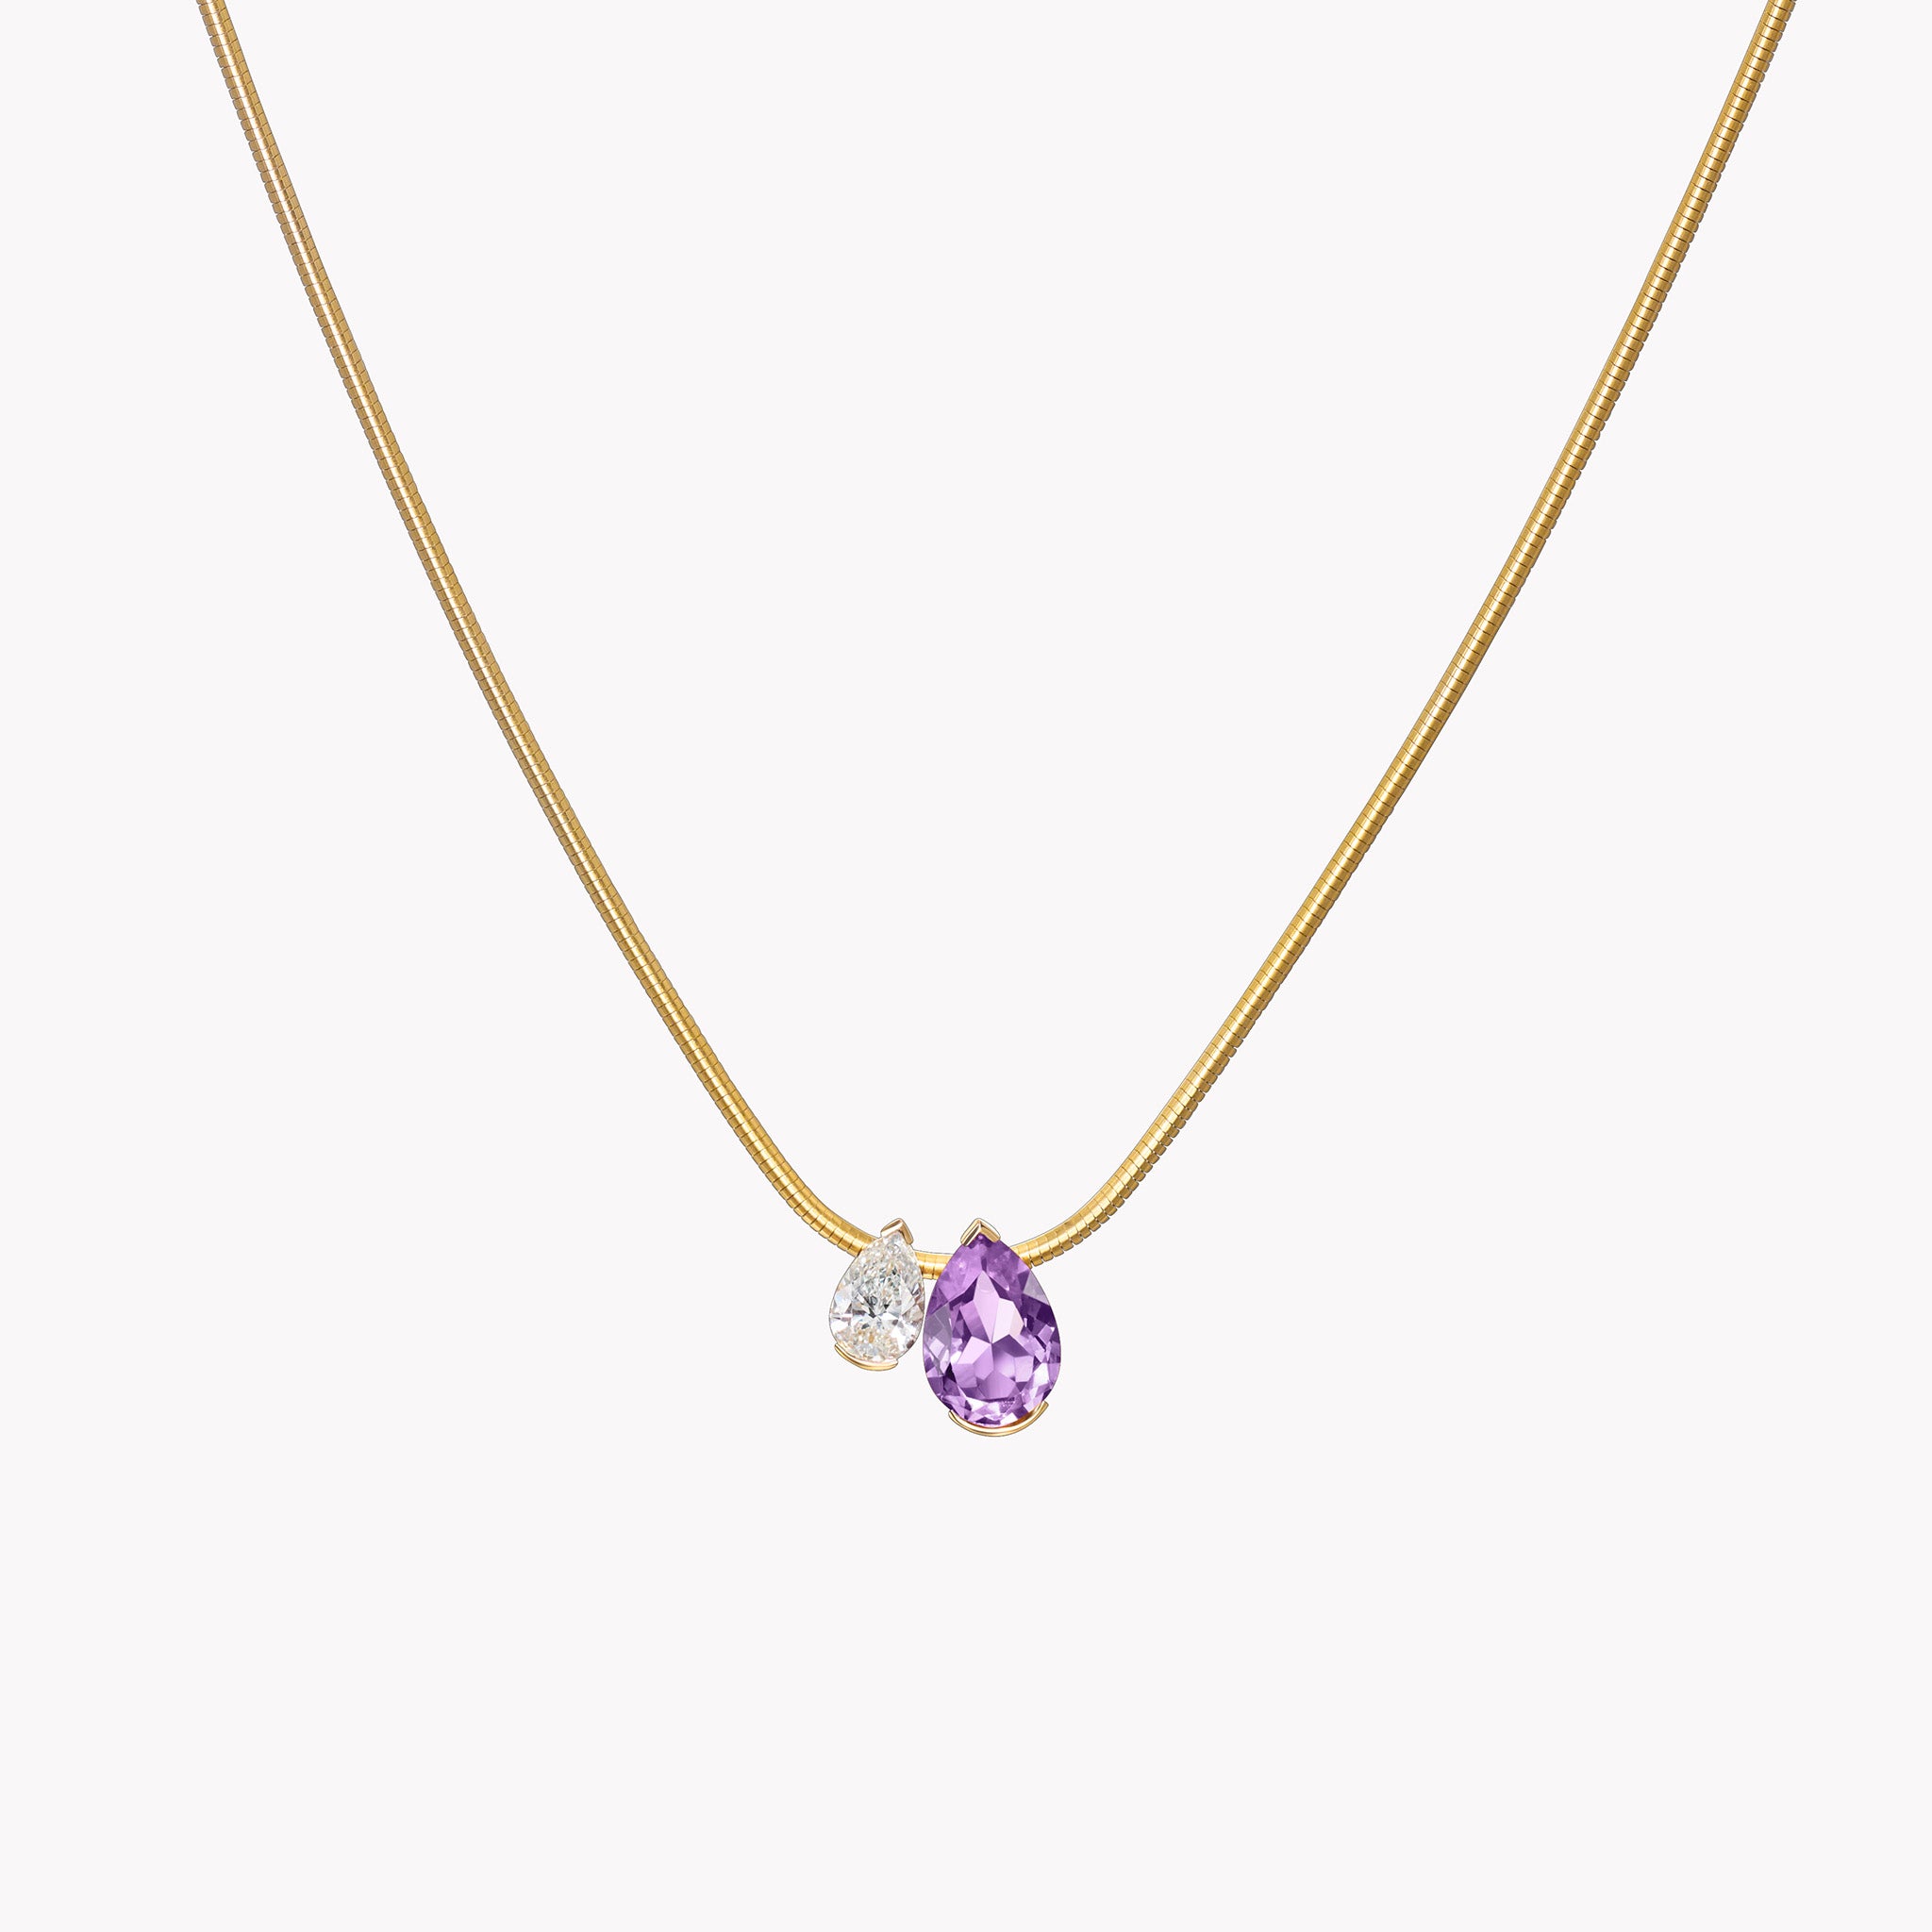 The Amethyst Muse Duo Pendant